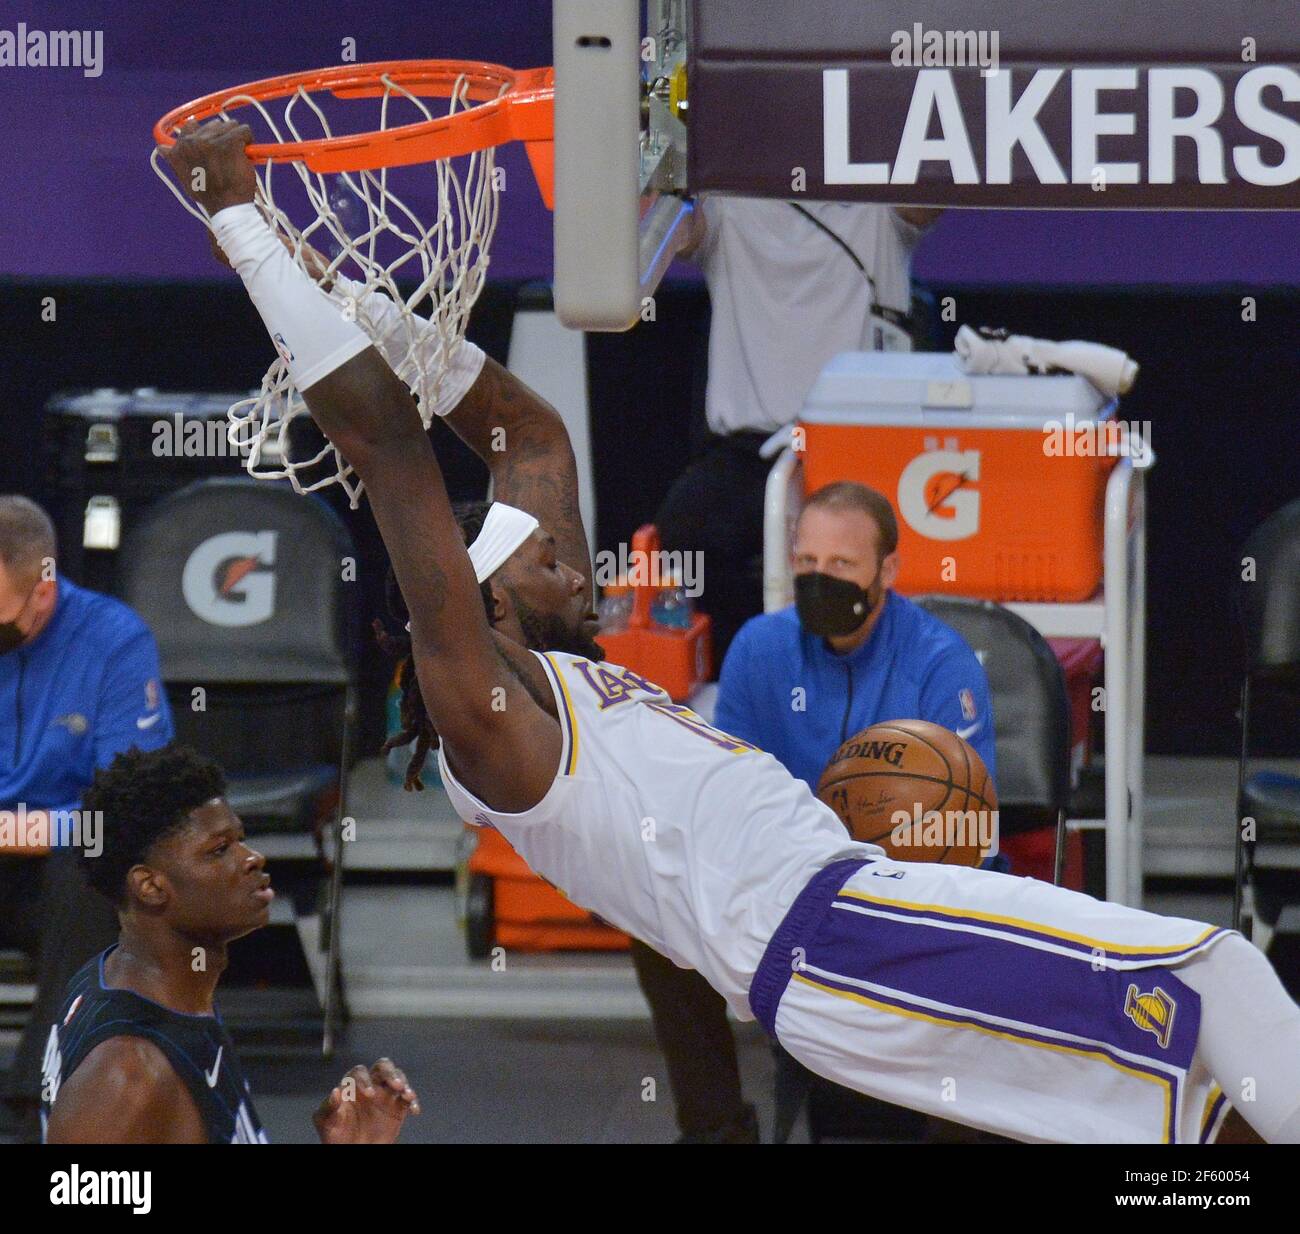 Los Angeles, United States. 29th Mar, 2021. Los Angeles Lakers' center Montrezl Harrell jams for two points against the Orlando Magic during the first half at Staples Center in Los Angeles on Sunday, March 28, 2021. The Lakers defeated the Magic 96-93. Photo by Jim Ruymen/UPI Credit: UPI/Alamy Live News Stock Photo